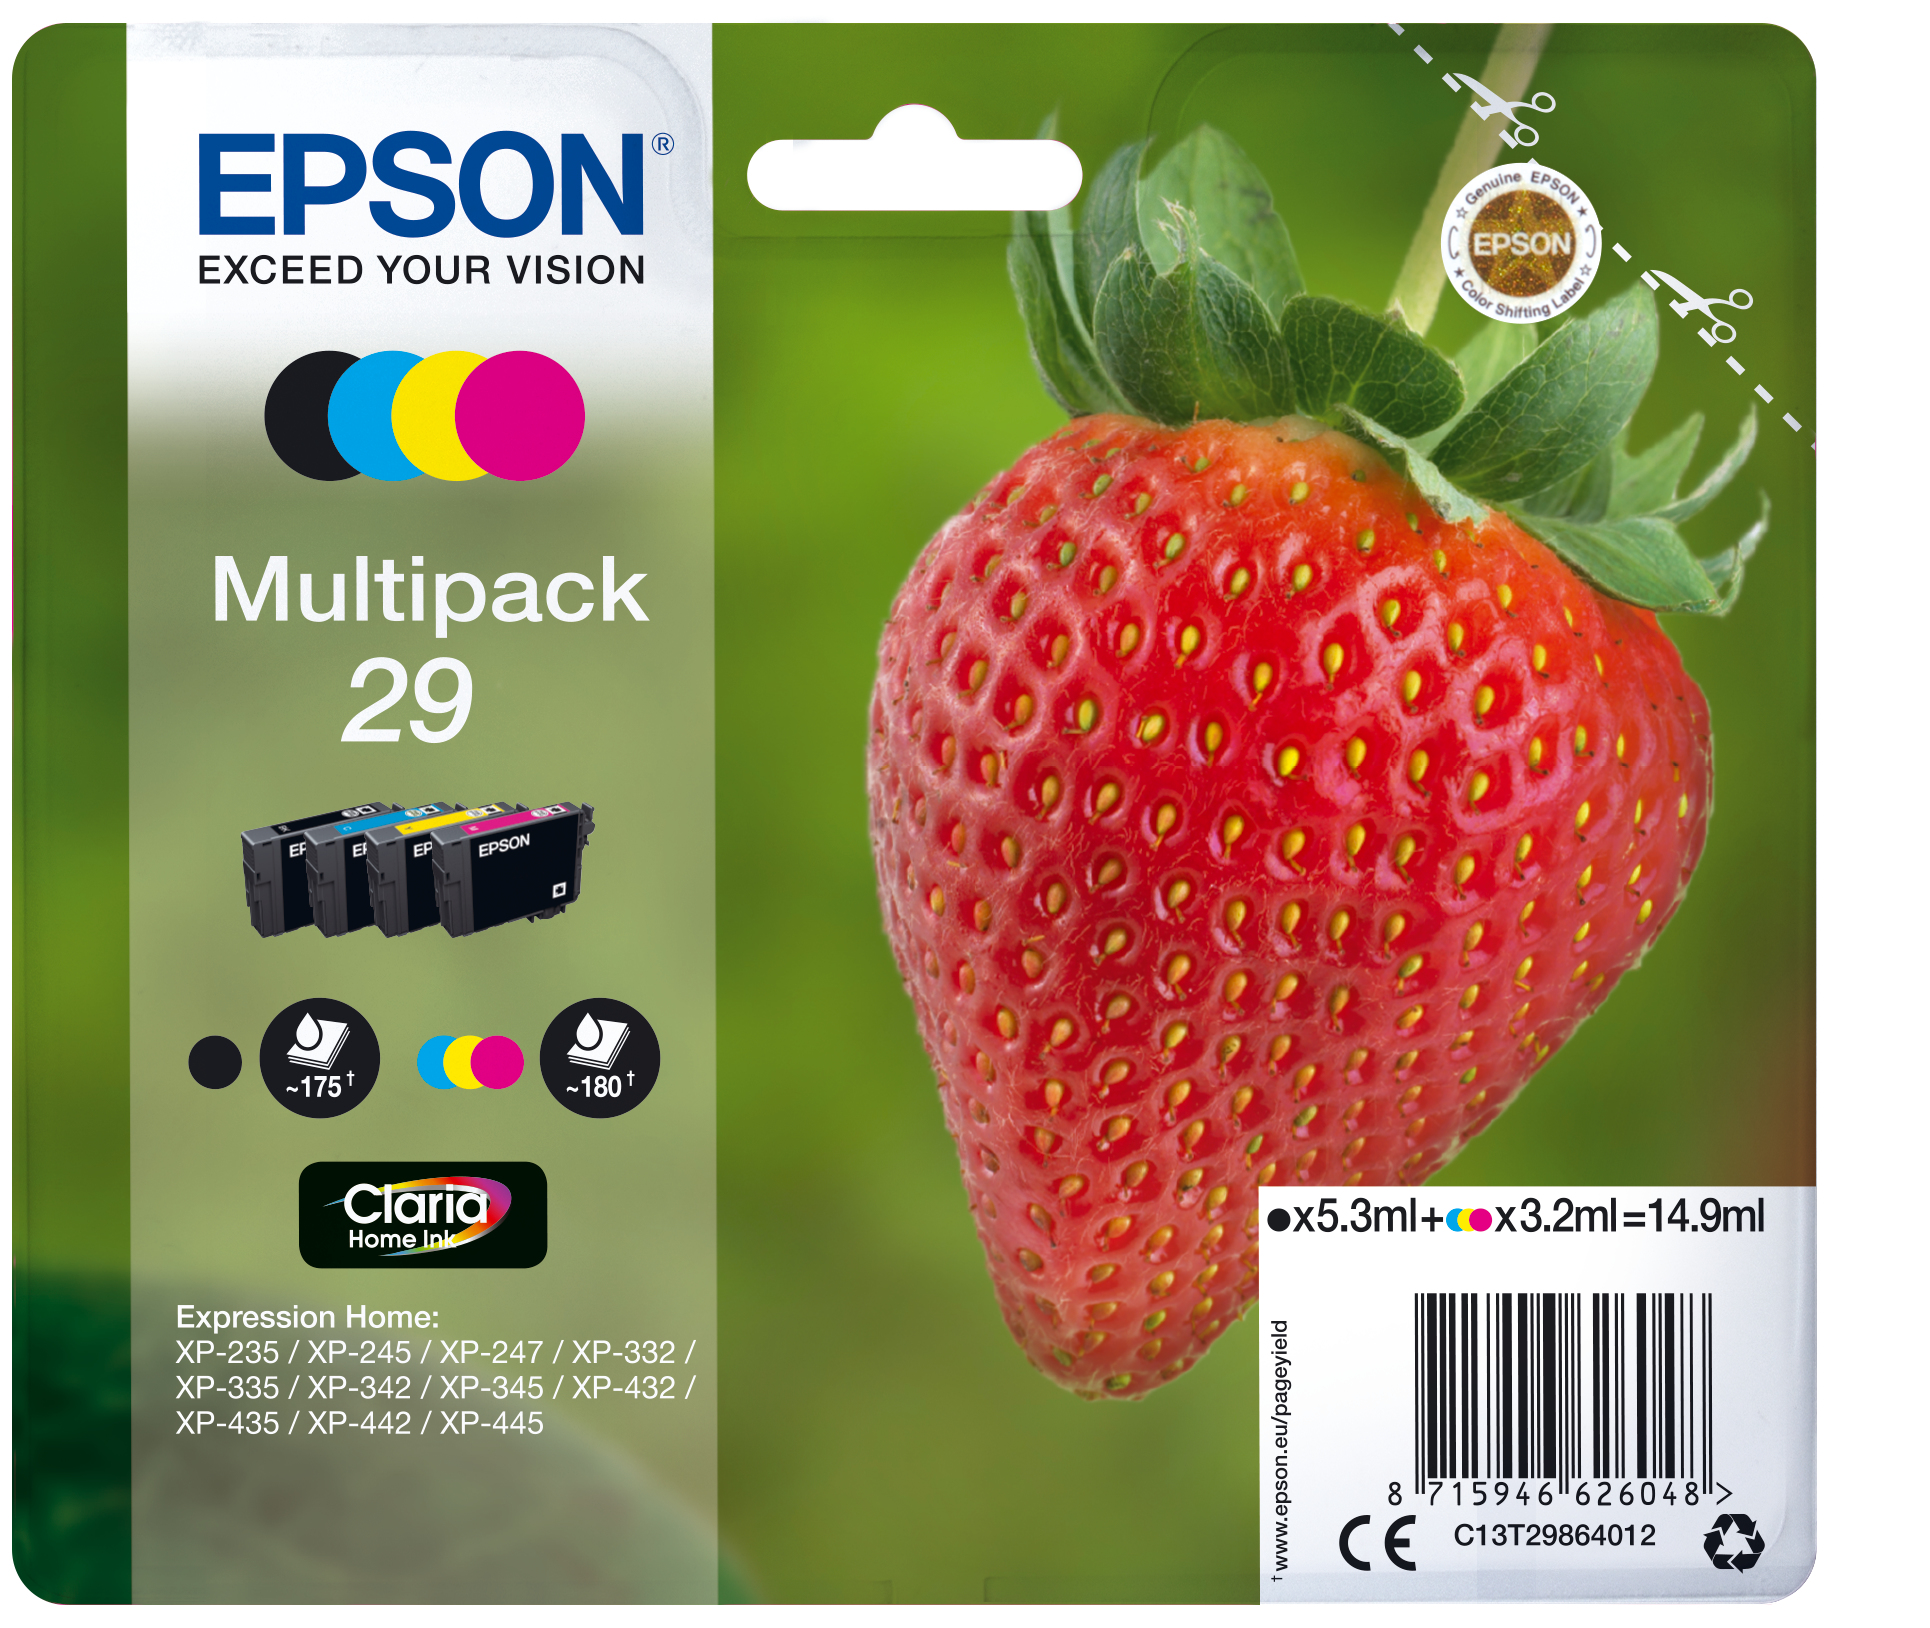 Multipack 4 Col 29 Home Ink Epson Consumer Ink S1 C13t29864012 8715946626048